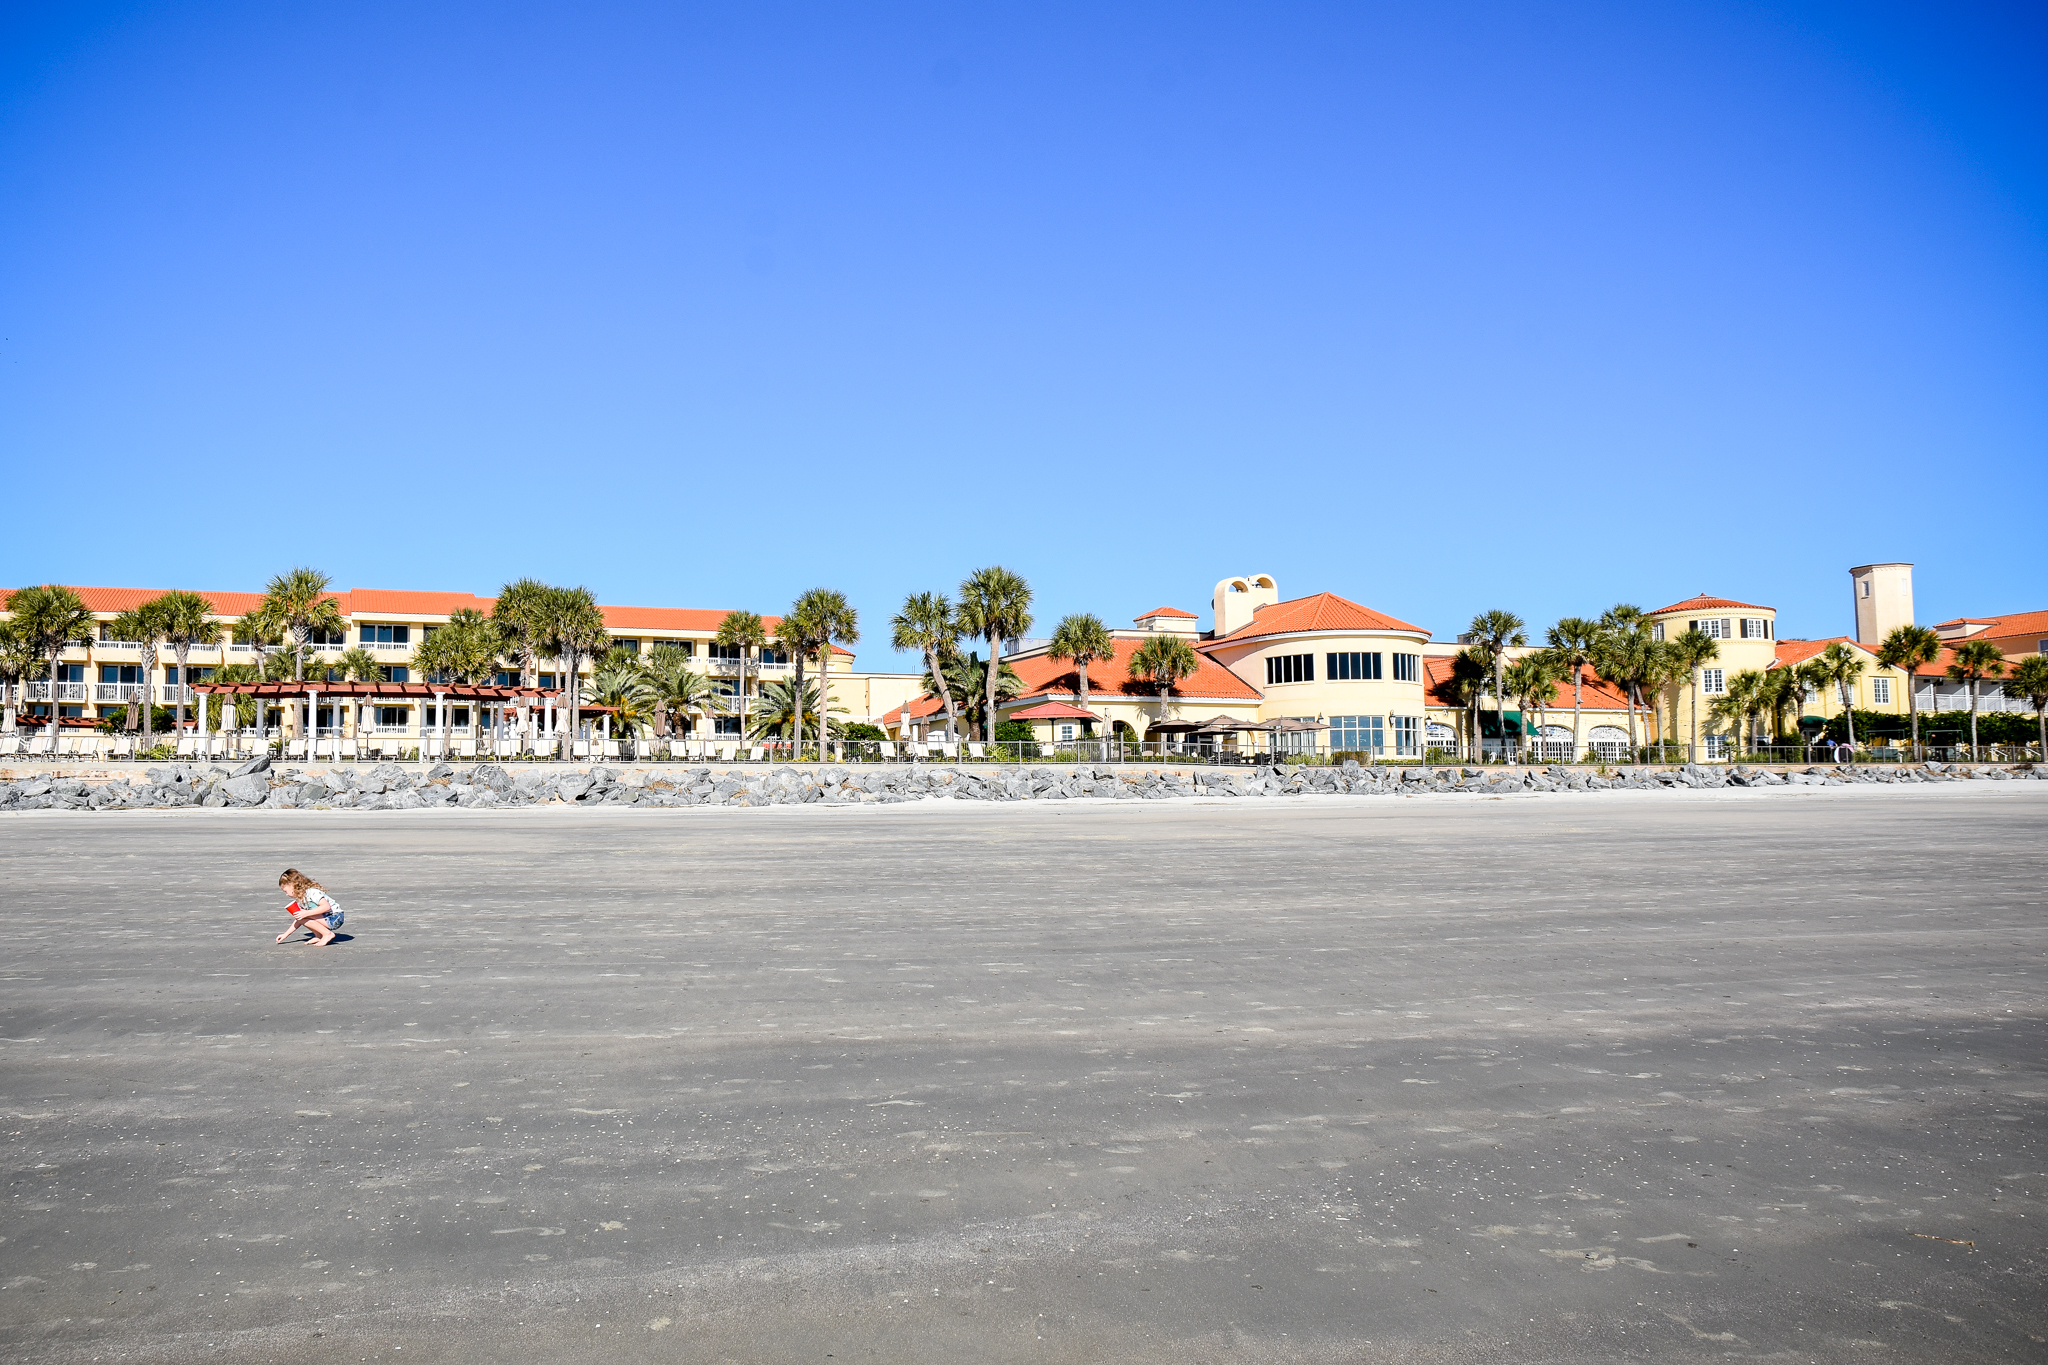 King and Prince Beach Resort at low tide